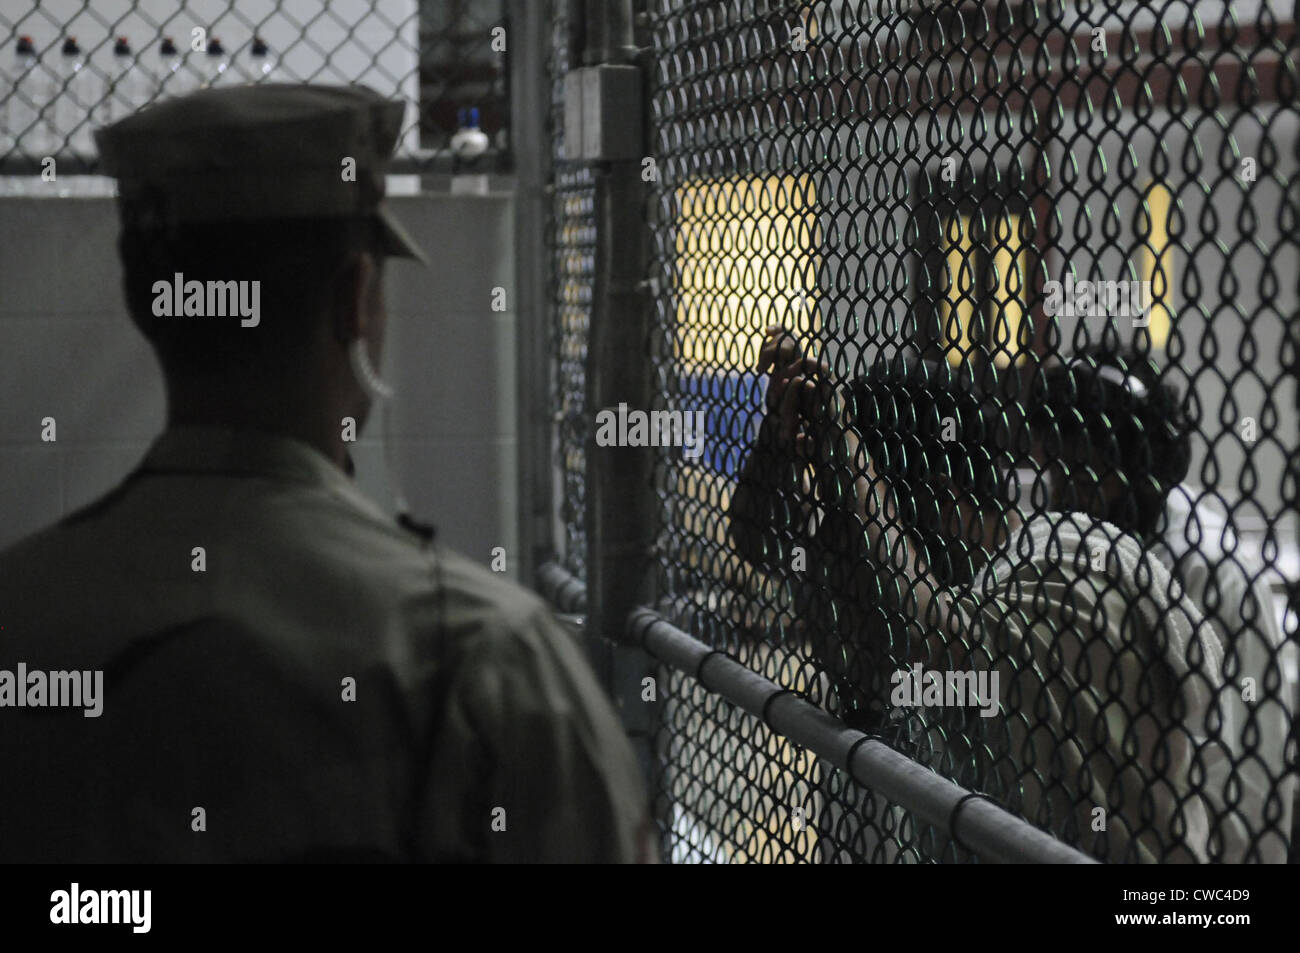 U.S. Sailor stands watch over a cell block at U.S. Naval Station Guantanamo Bay military prison while detainees look through Stock Photo